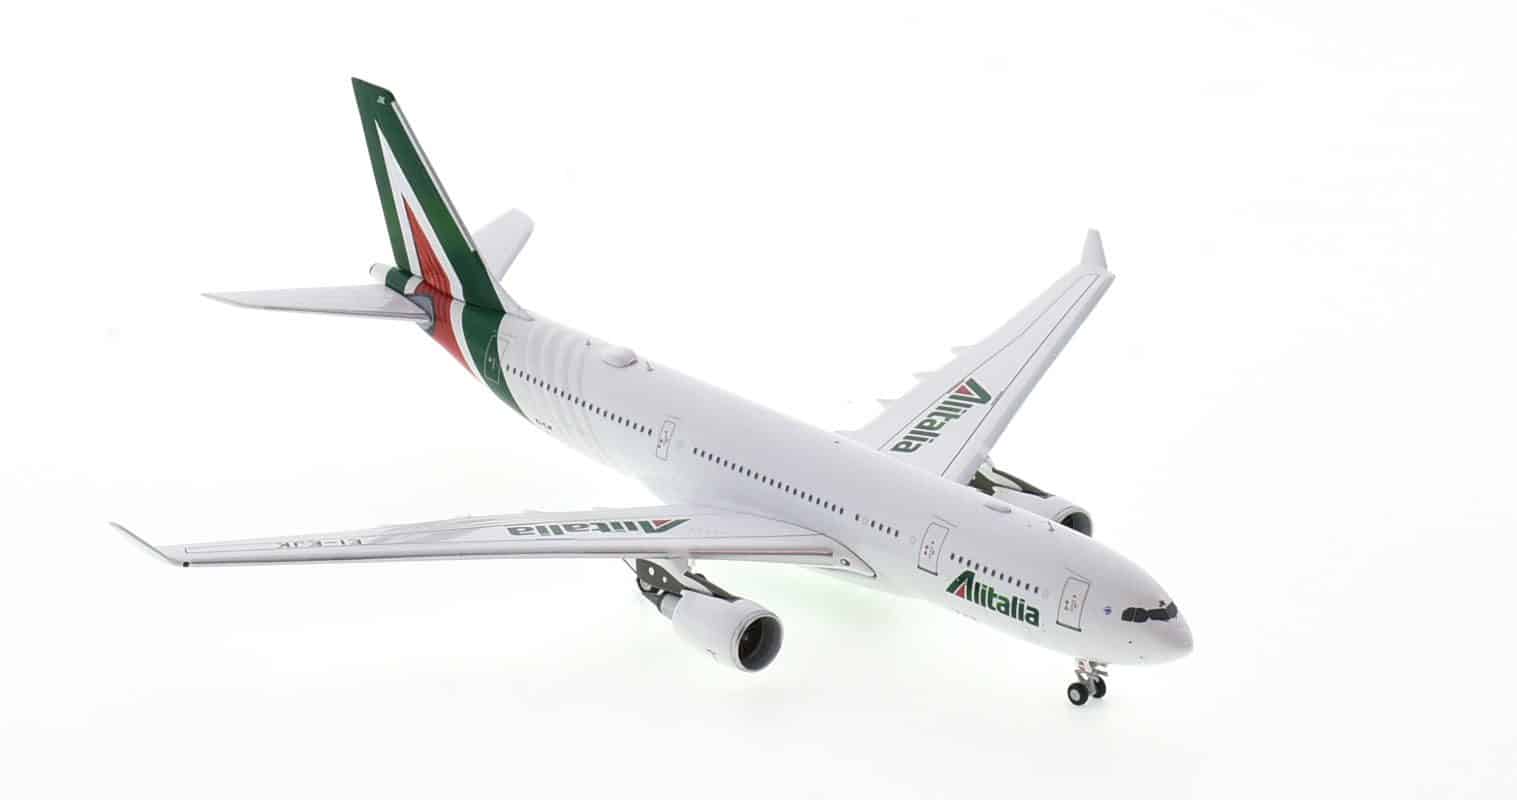 Front starboard side view of NG Models NG61037 - 1/400 scale diecast model of the Airbus A330-200 registration  EI-EJK, in Alitalia livery.